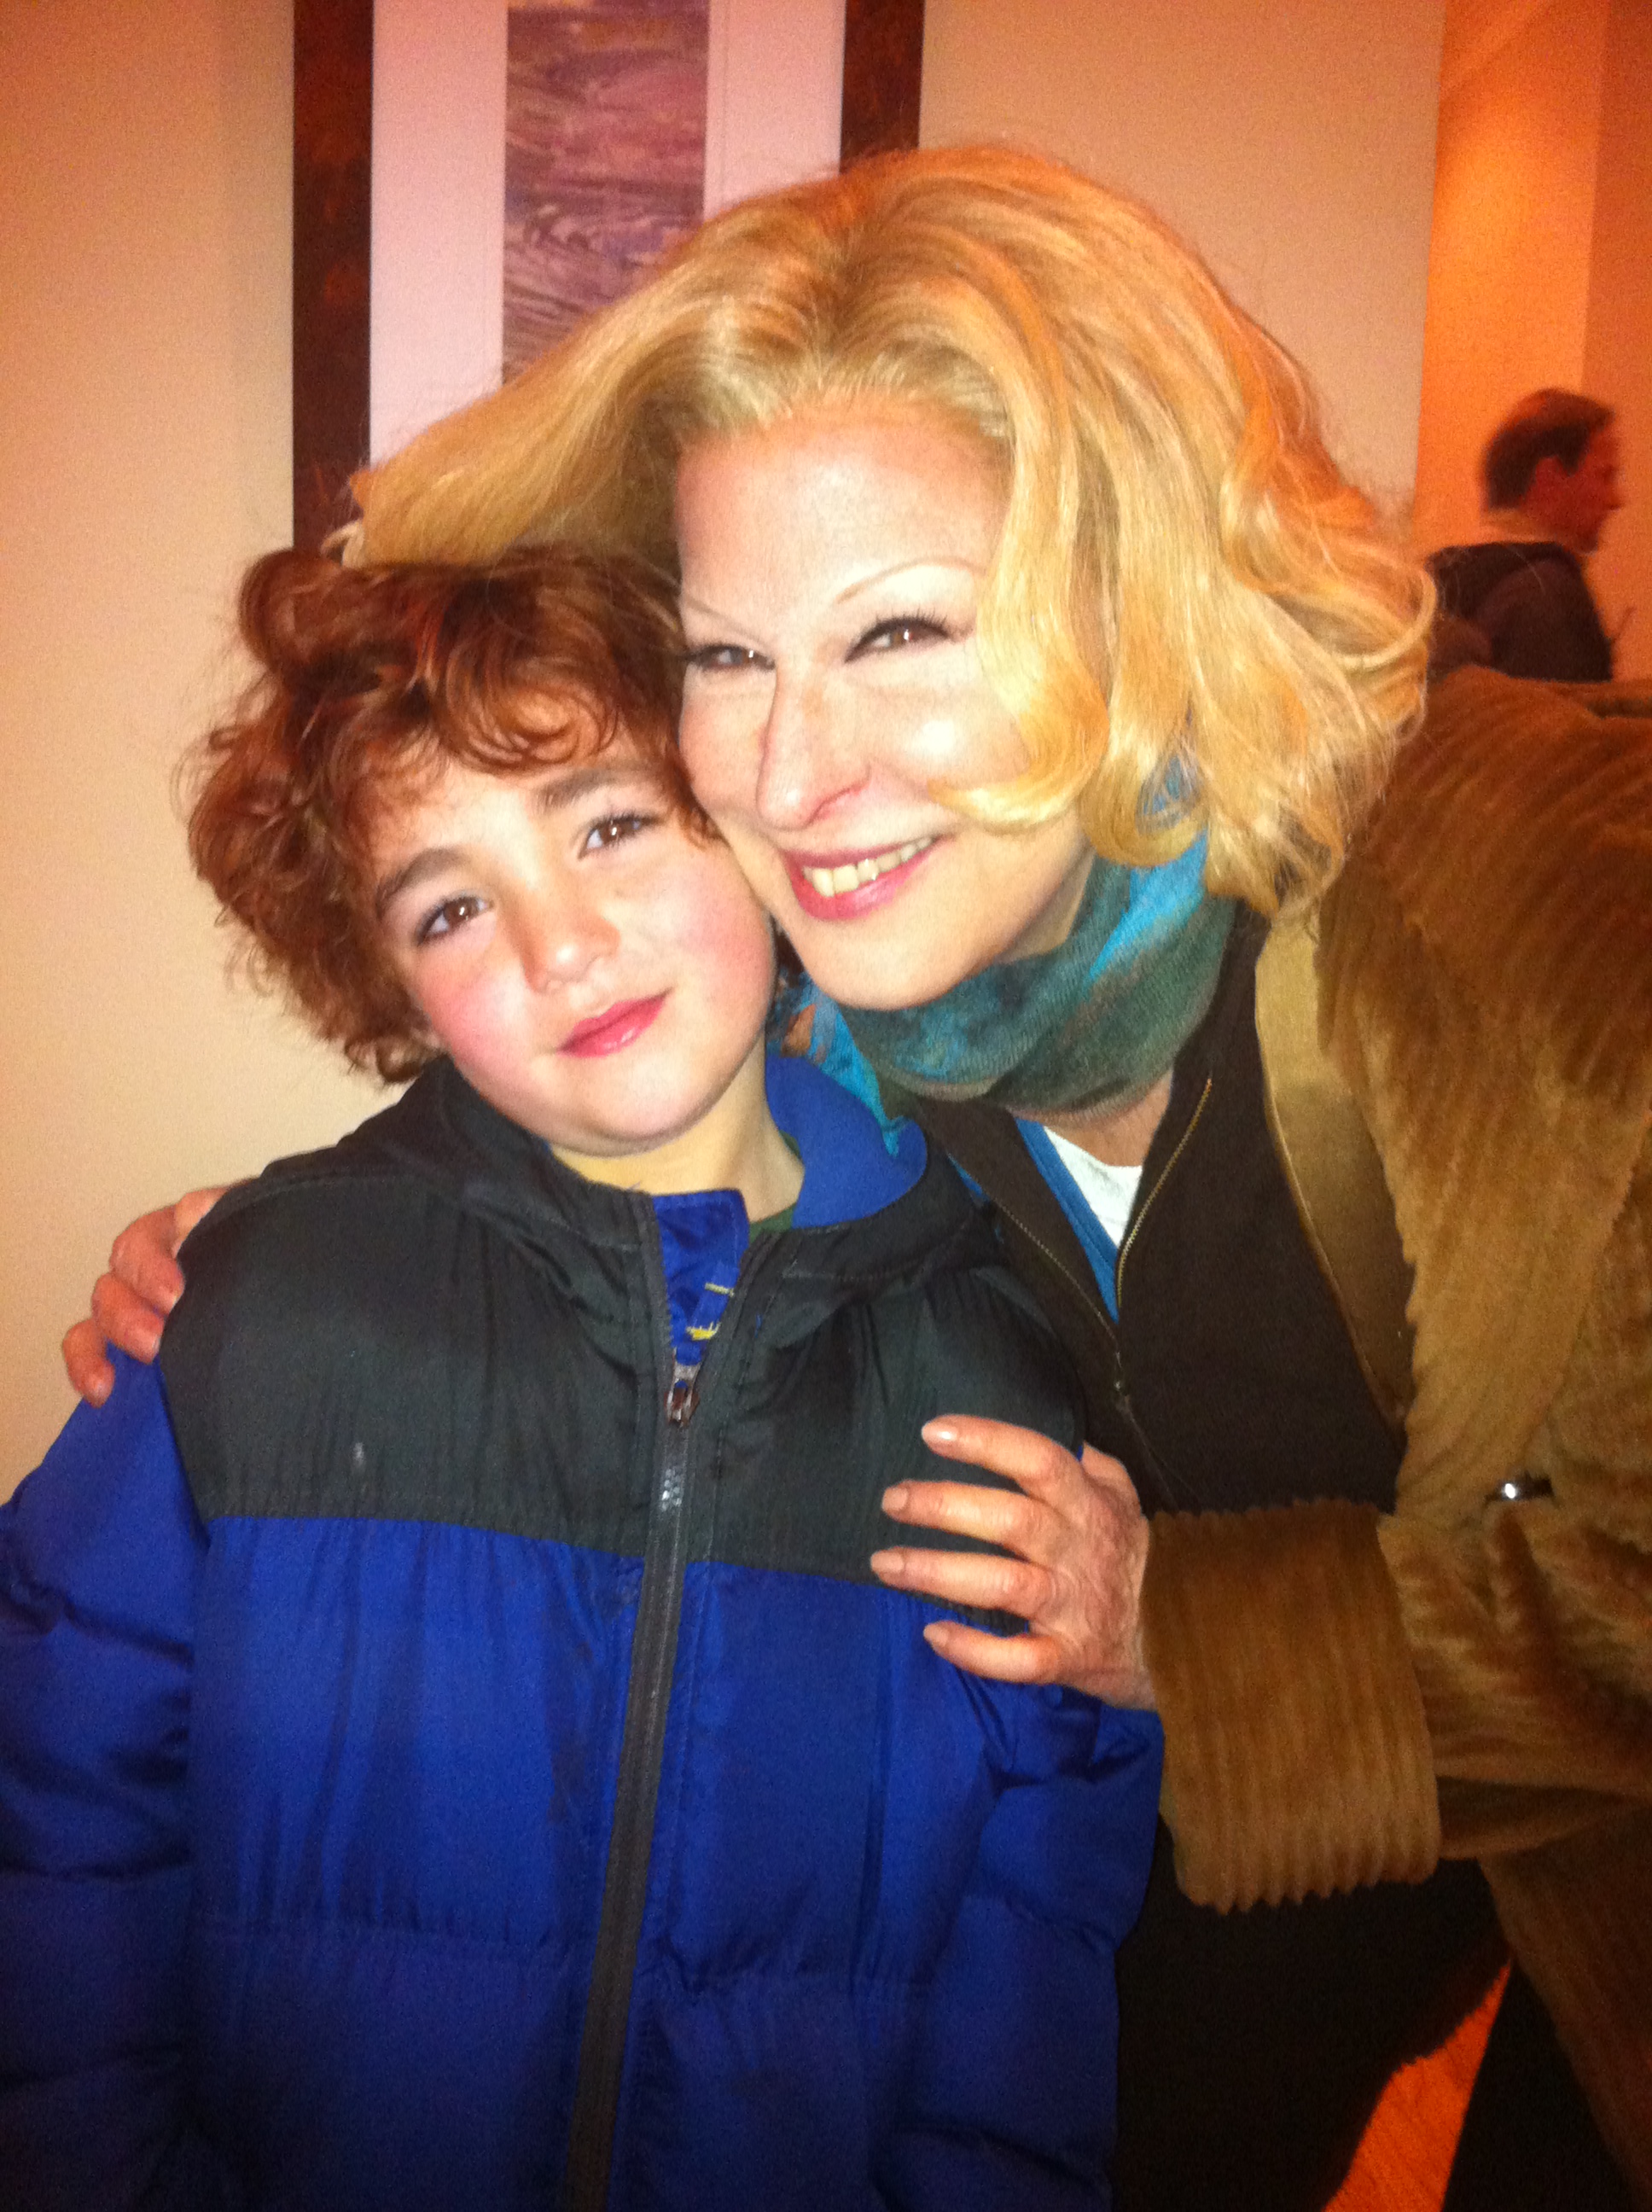 Luke Donaldson and Bette Midler from the set of Parental Guidance